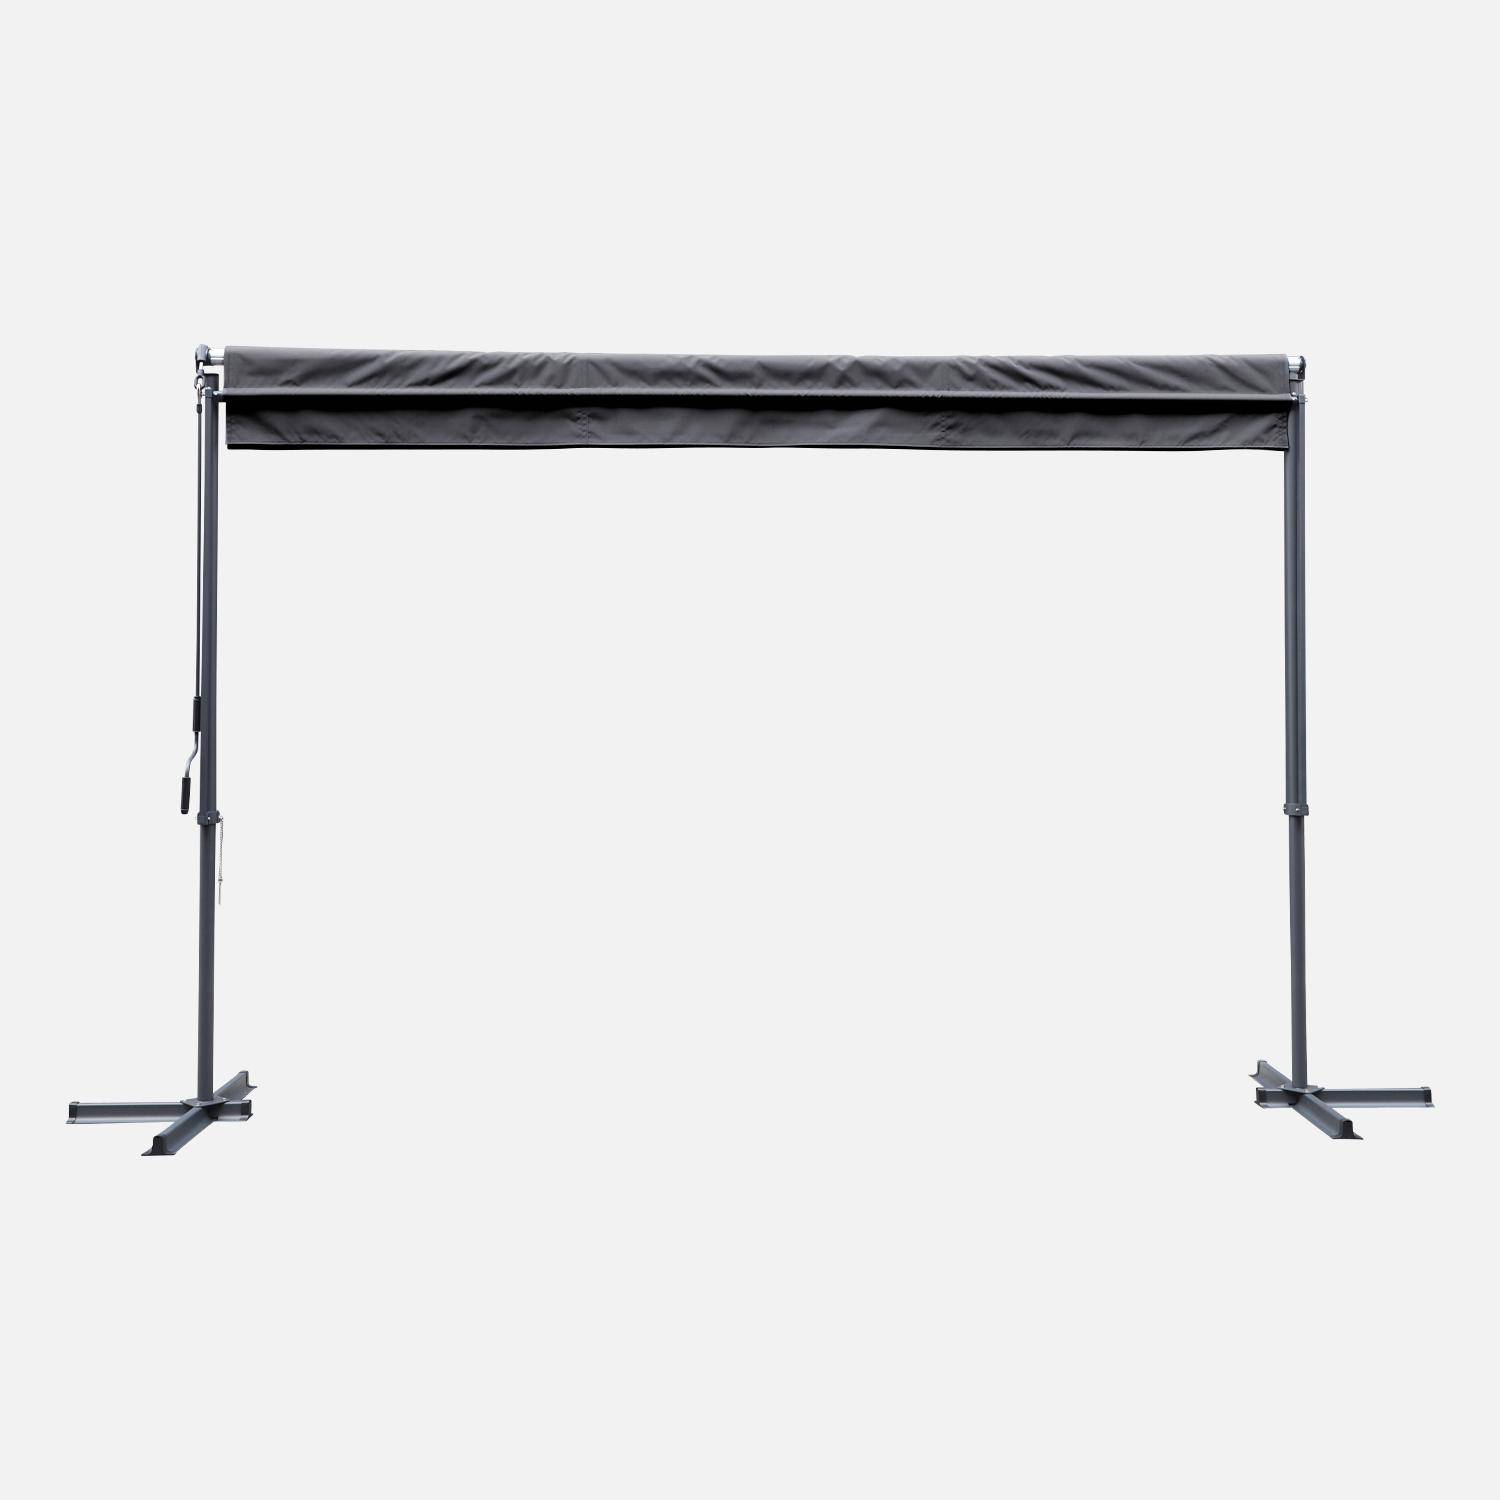 Rectractable patio awning - Manual crank system, freestanding awning, coated polyester canvas - Penne 4x3m - Grey,sweeek,Photo2